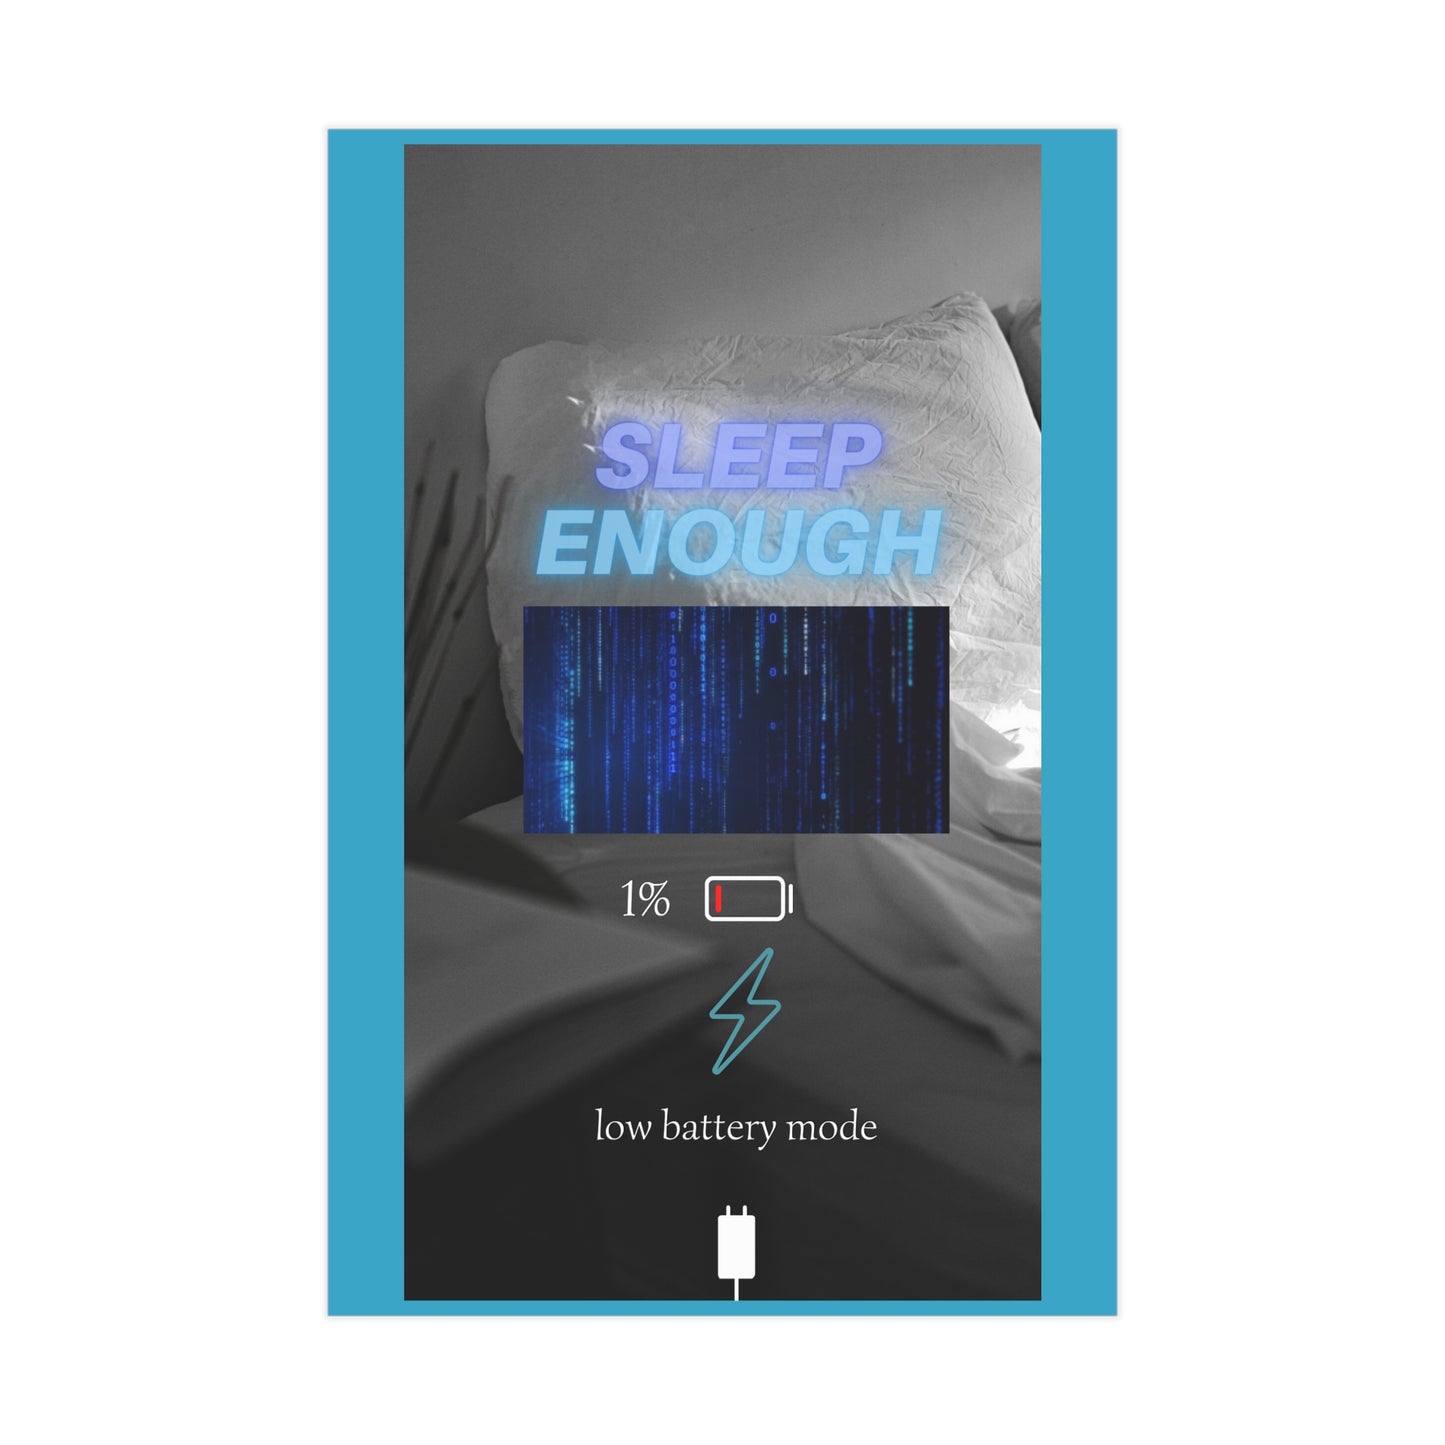 PoM's Mindfulness series ... "Sleep Enough  - 1% low battery mode" ... Unframed Print (matte or glossy, 4 different sizes)